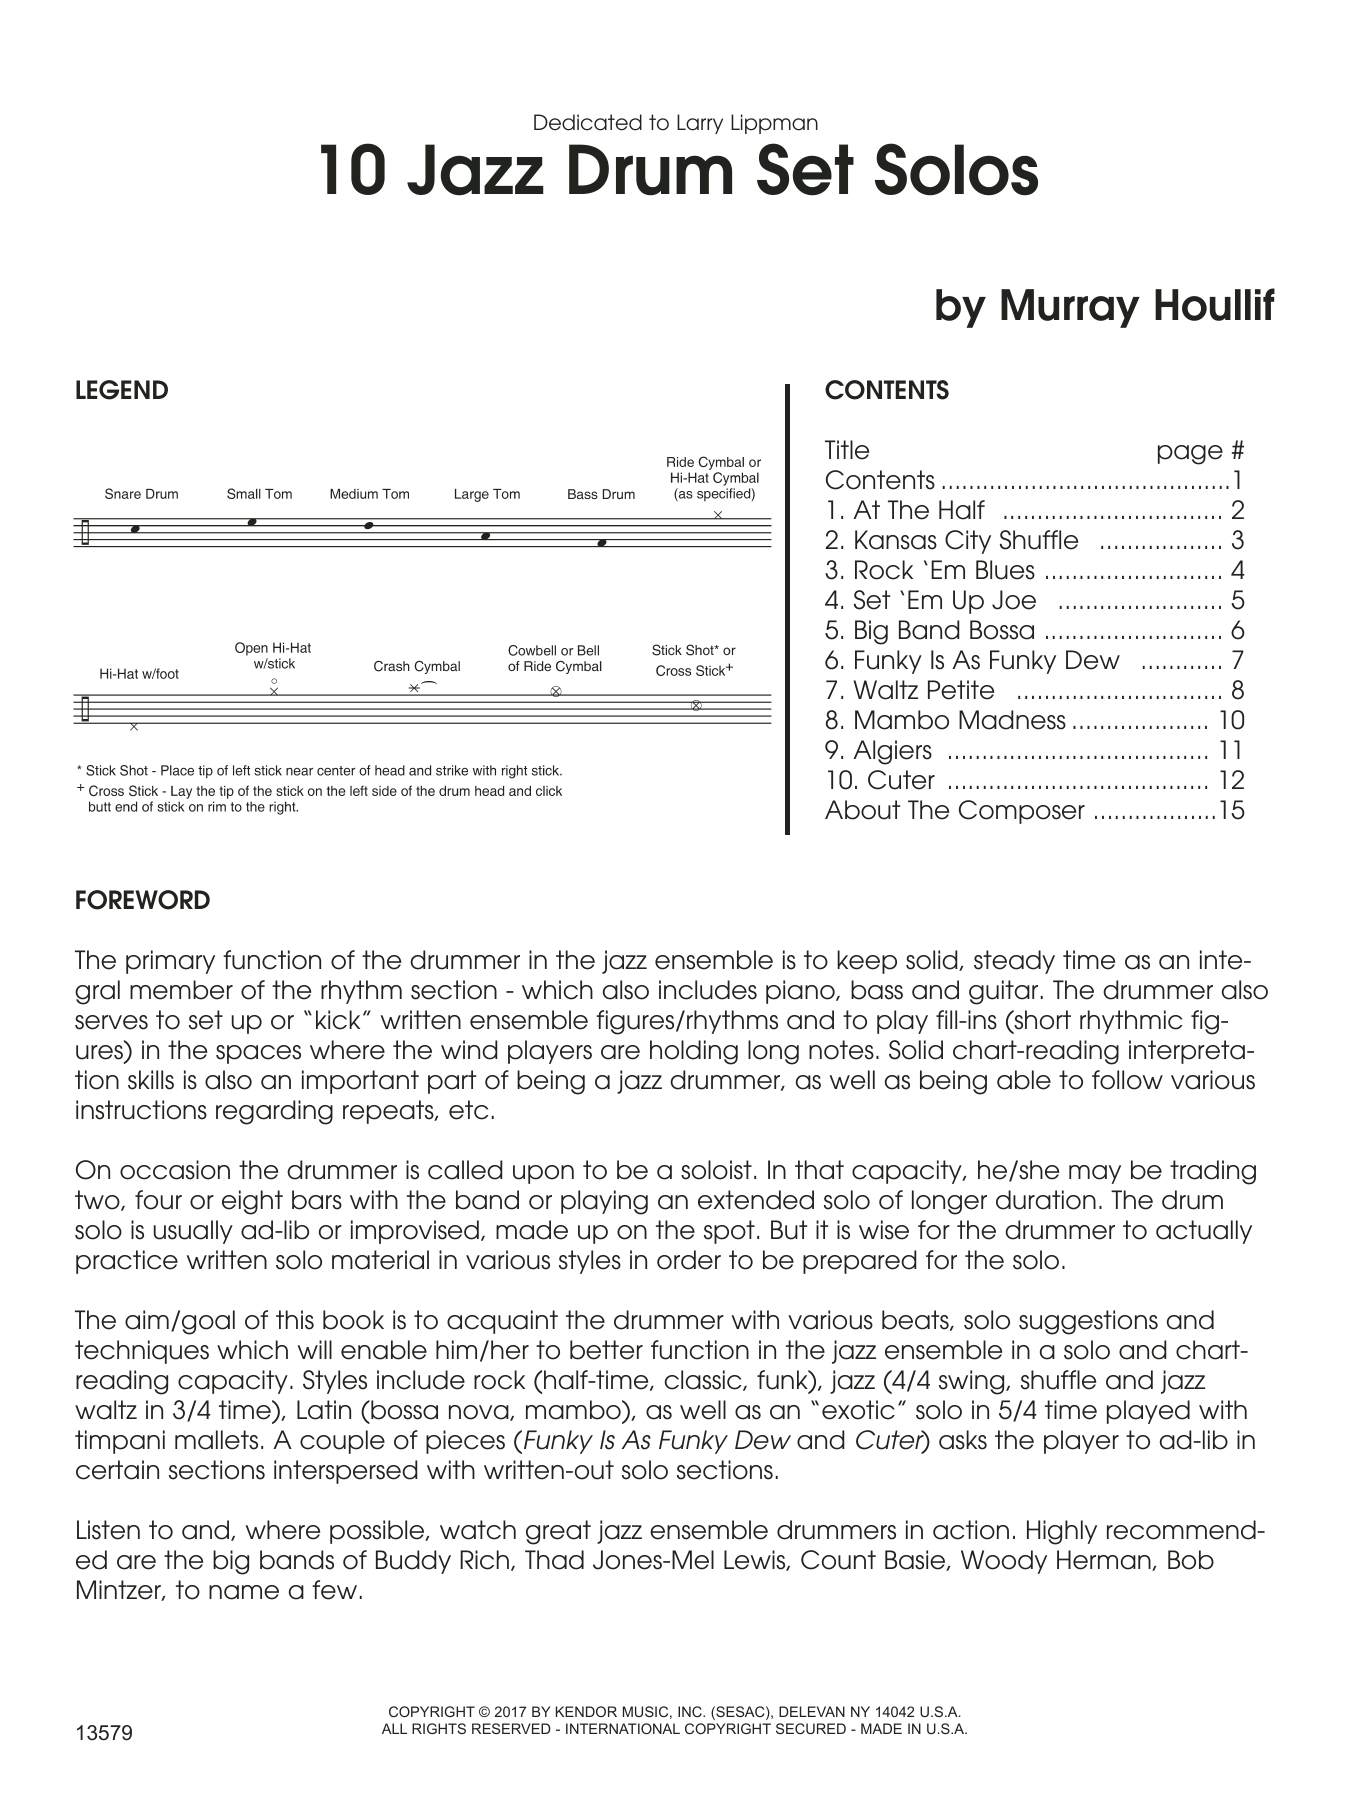 10 Jazz Drum Set Solos by Murray Houllif